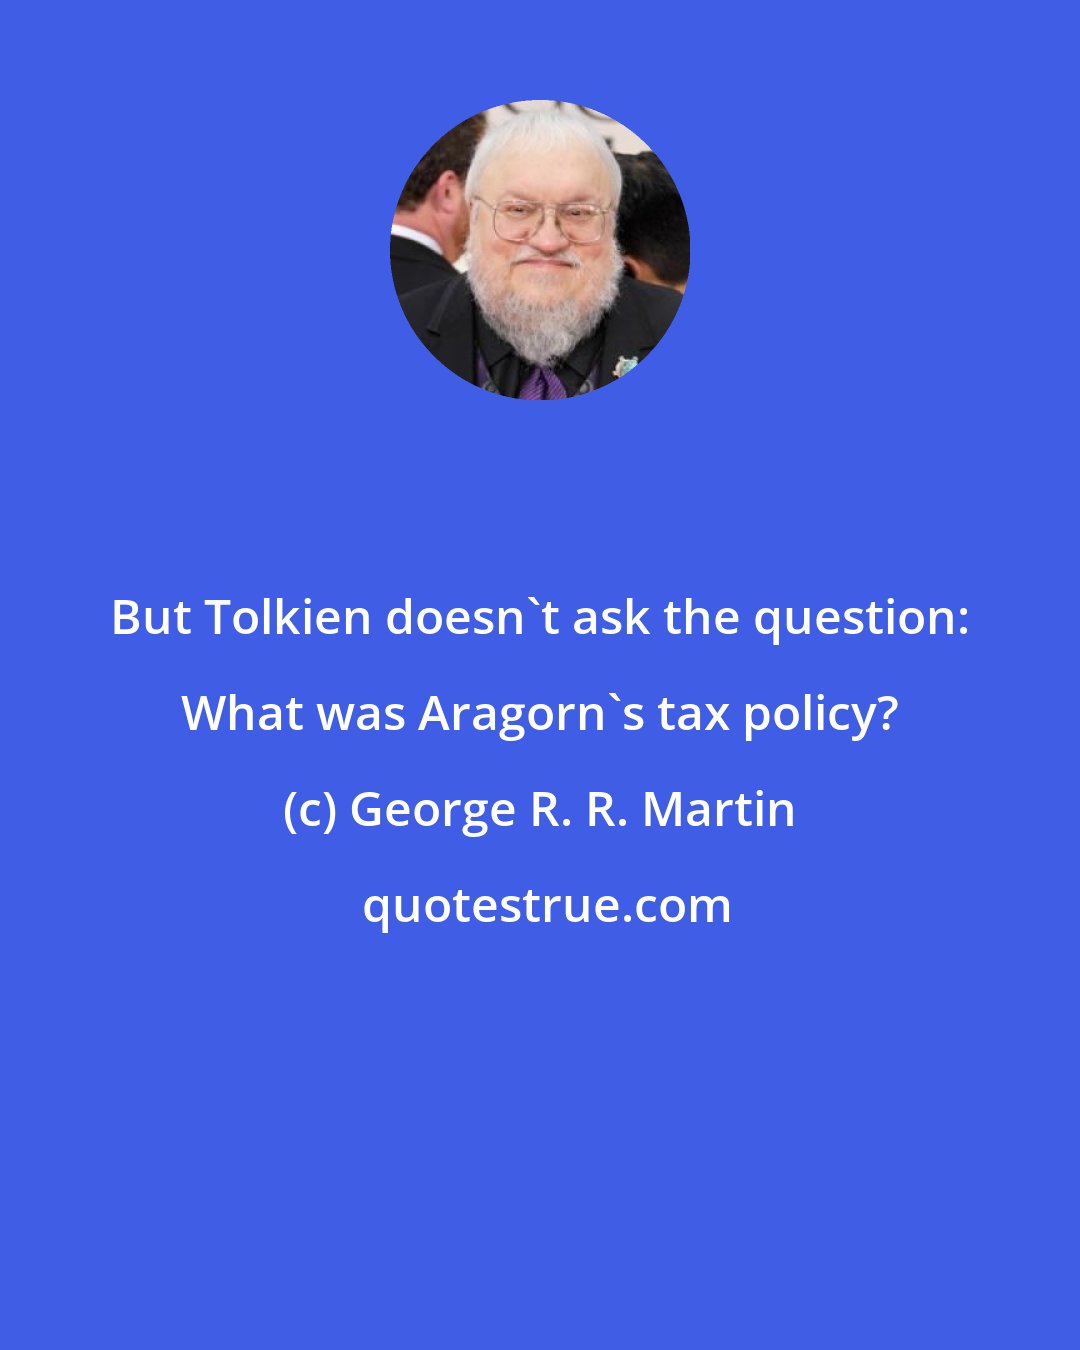 George R. R. Martin: But Tolkien doesn't ask the question: What was Aragorn's tax policy?